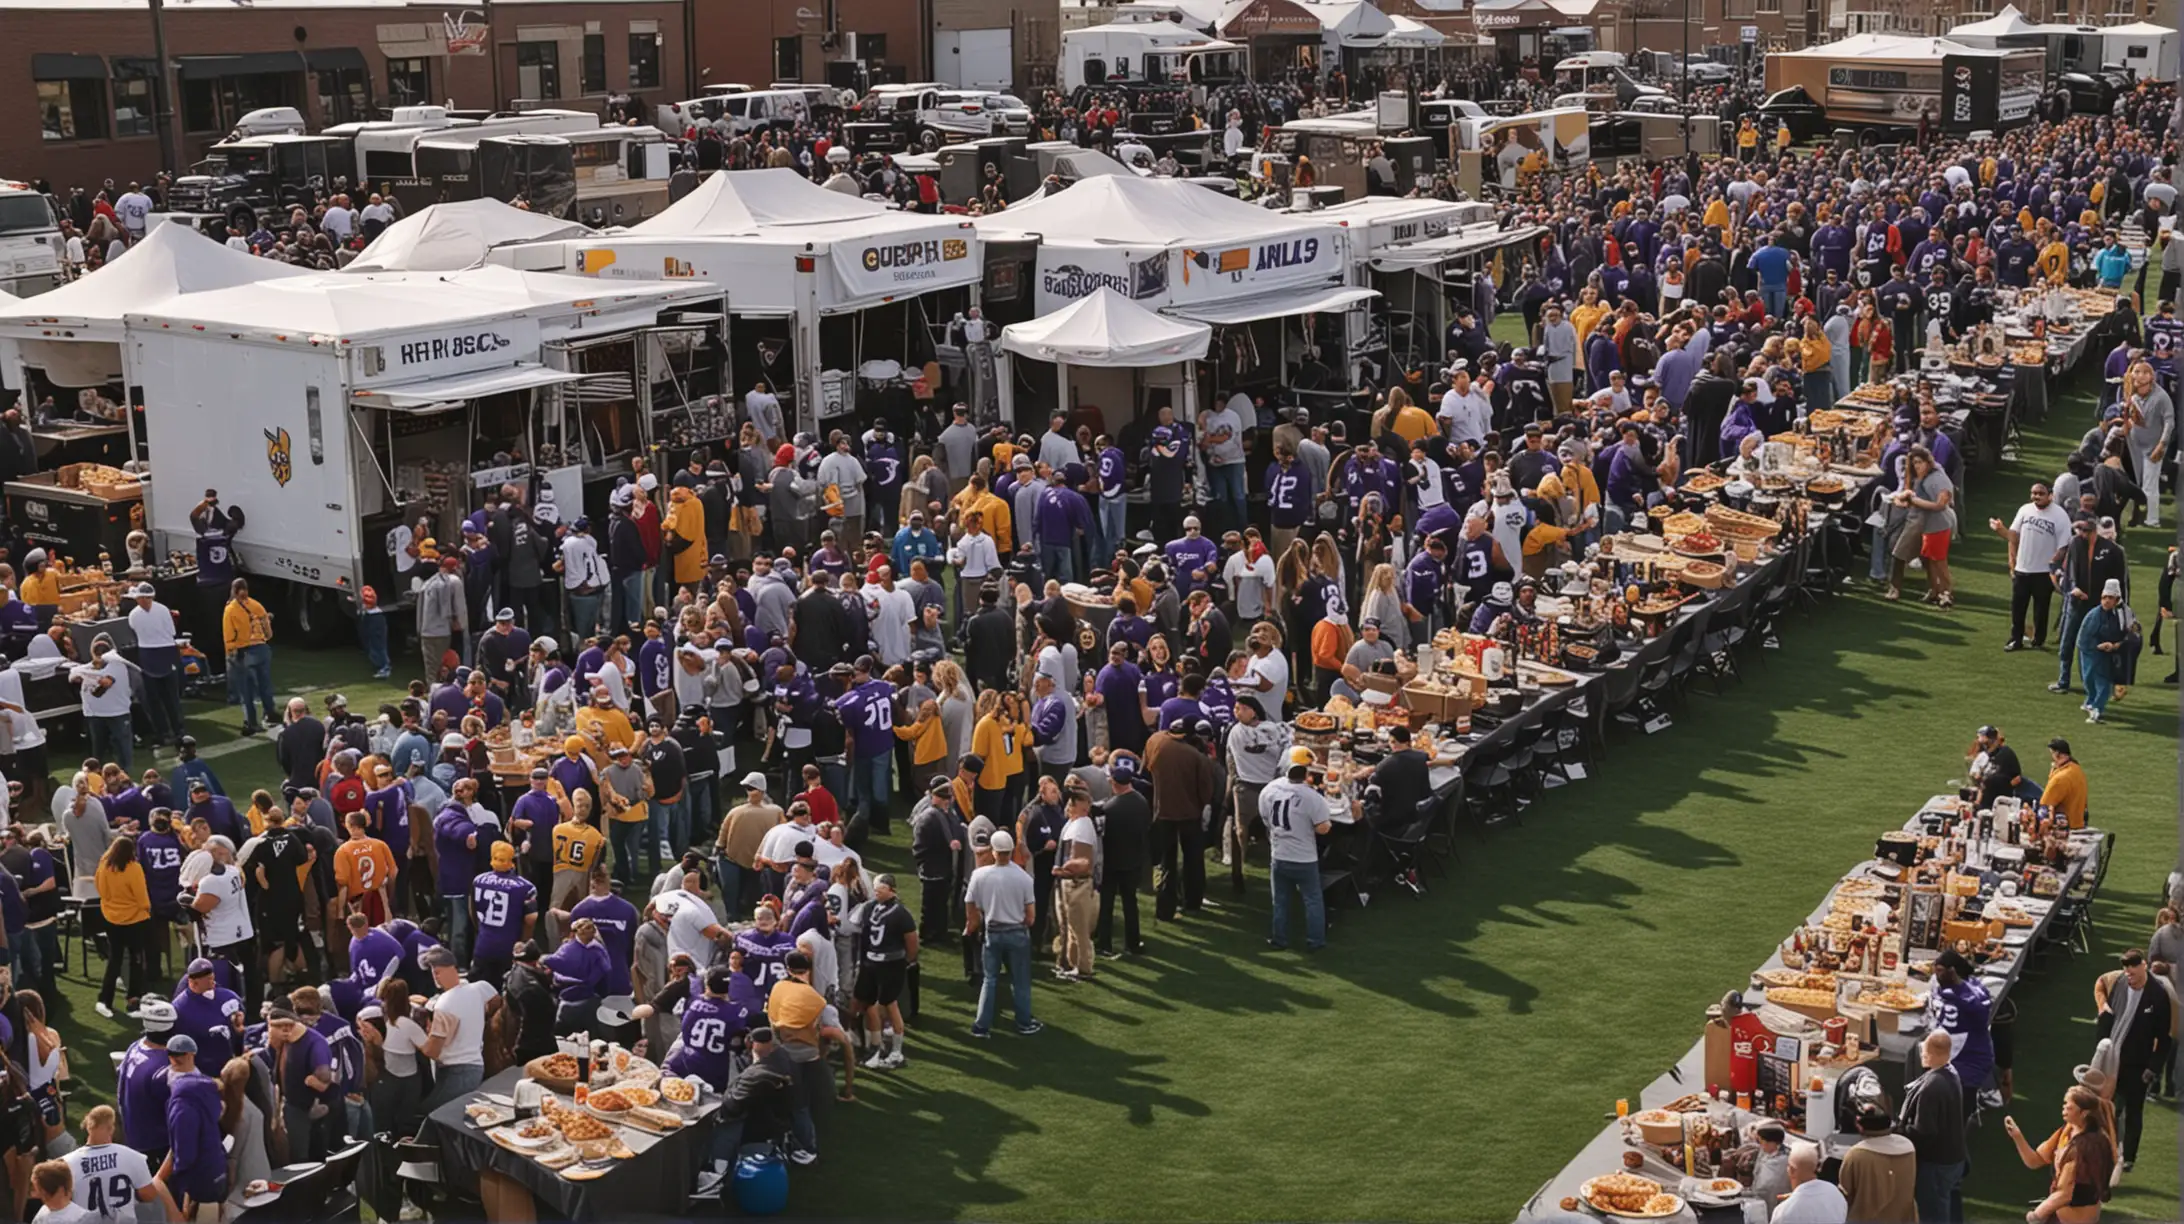 Cinematic NFL Vikings Tailgate Party with Food and Drinks